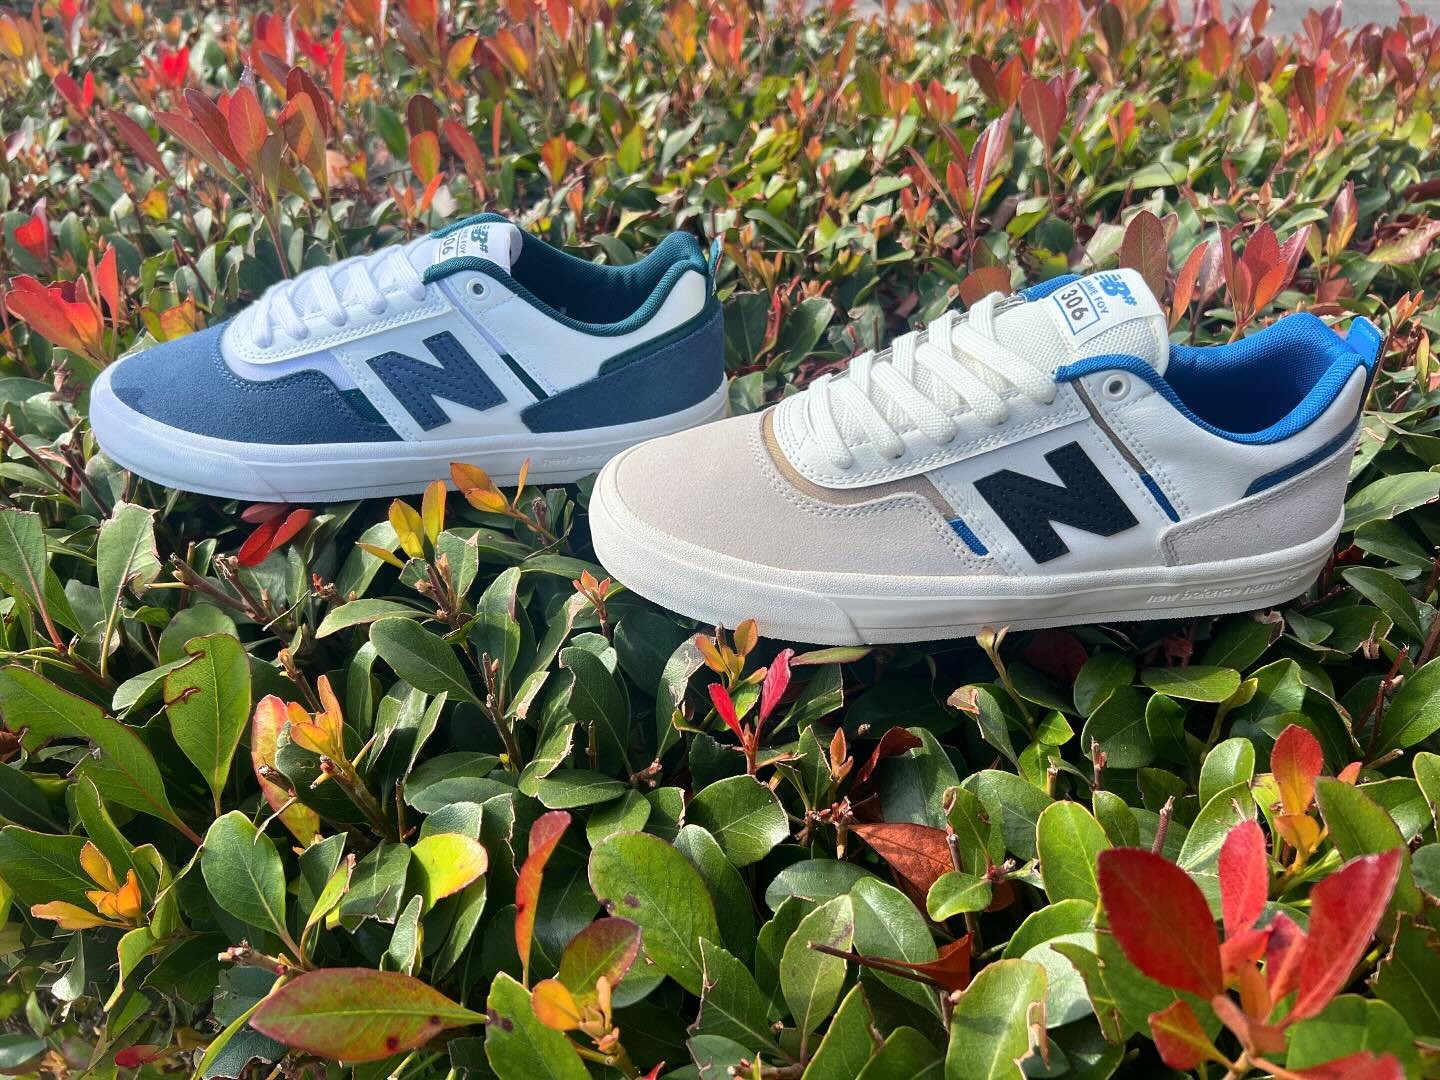 Sweet new colors of Jamie Foy signature New Balance shoe! Come by and grab one before they are gone! #skate #newbalance #shoplocal #surfconnection